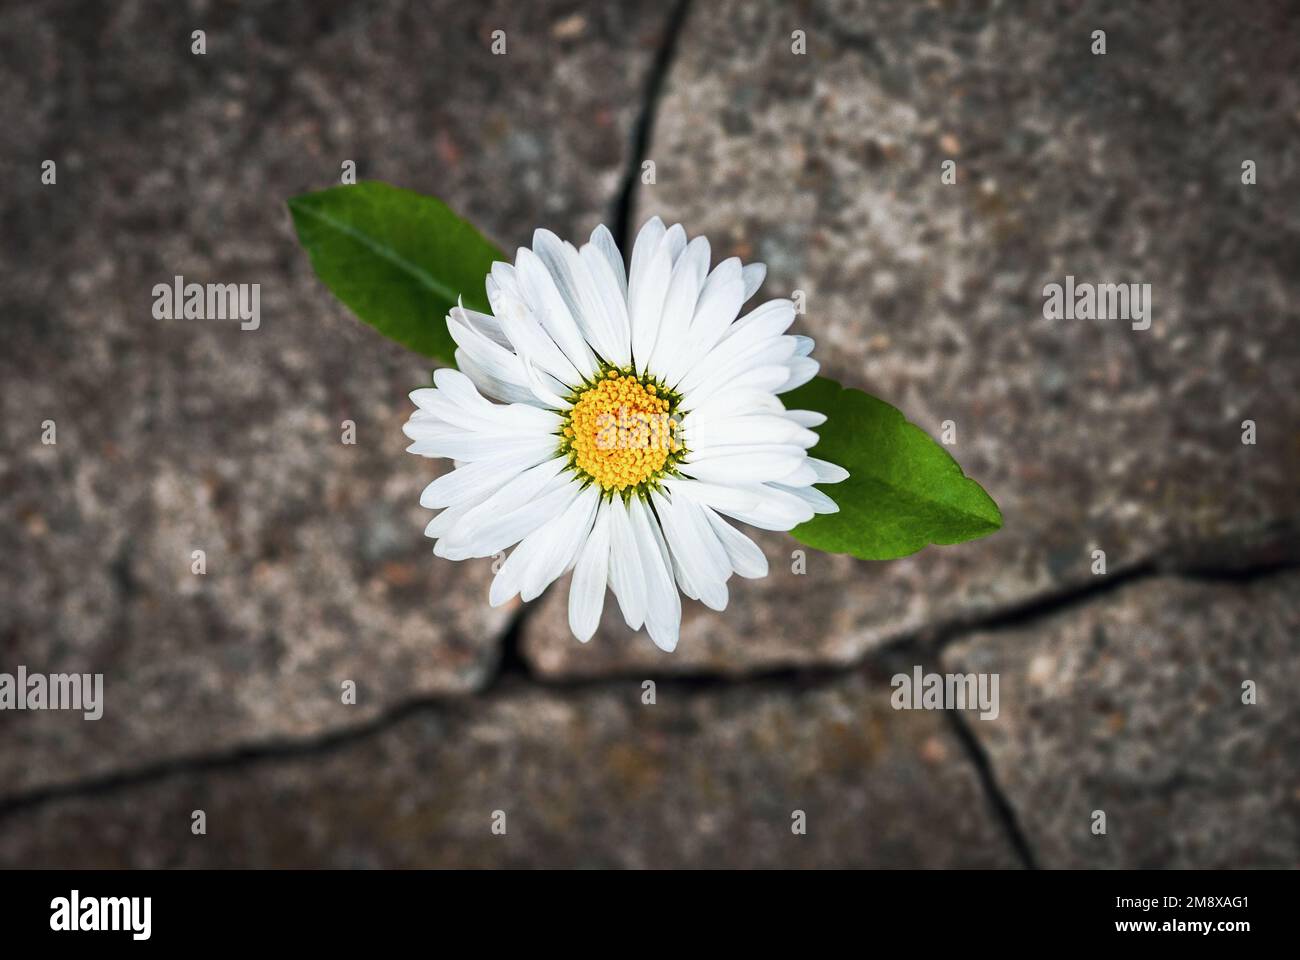 White flower growing in cracked stone, hope life rebirth resilience symbol Stock Photo